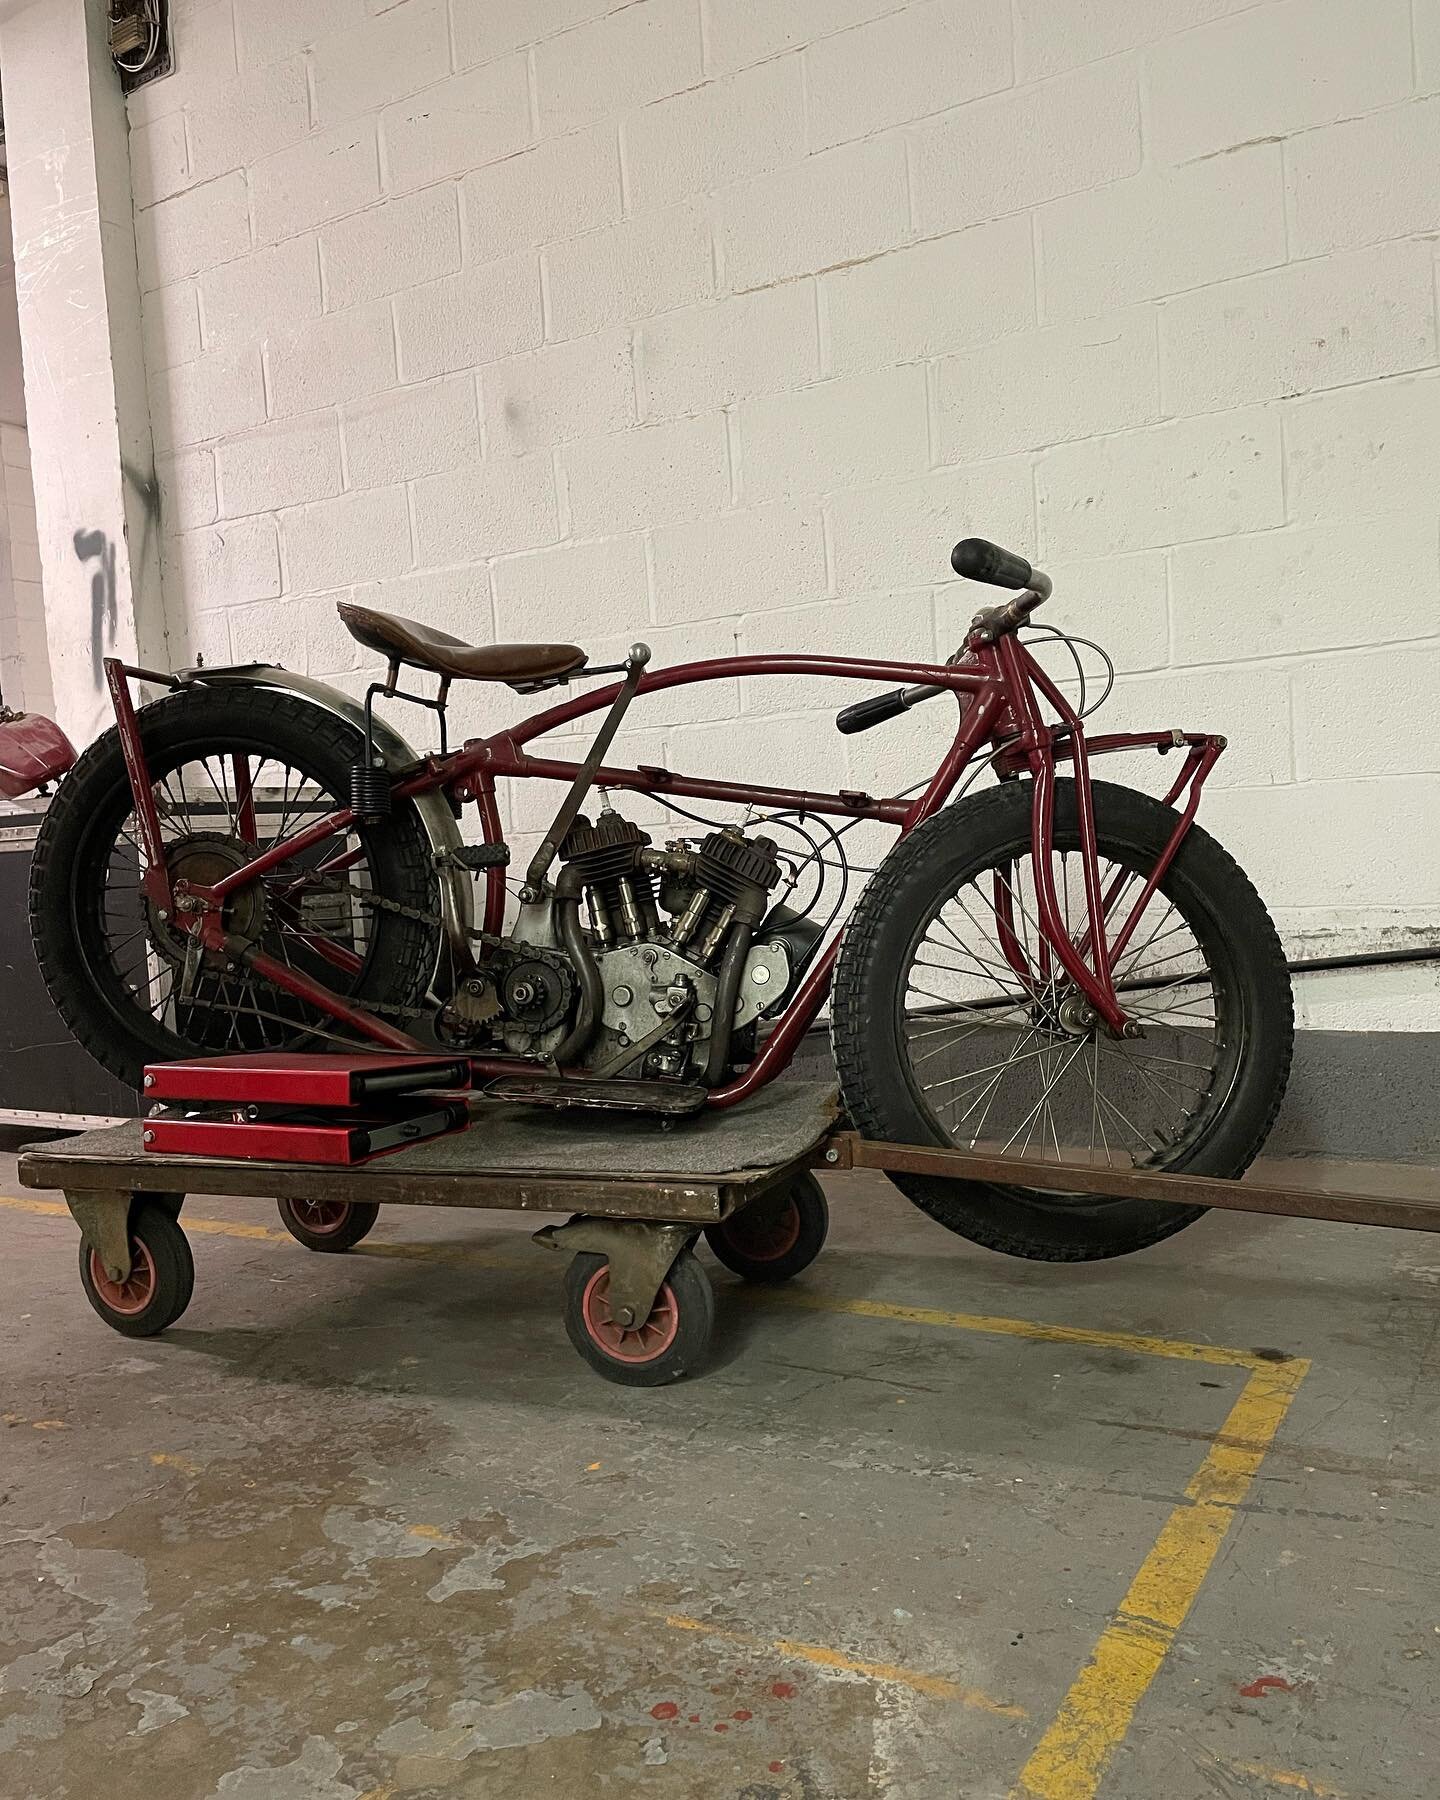 Vintage Indian put right by us, frame straighten and fork repair&hellip;
#jakerobbinsvintageengineering #vintagemotorcycles #indianmotorcycle #framerepairuk #motorcycle #hastings